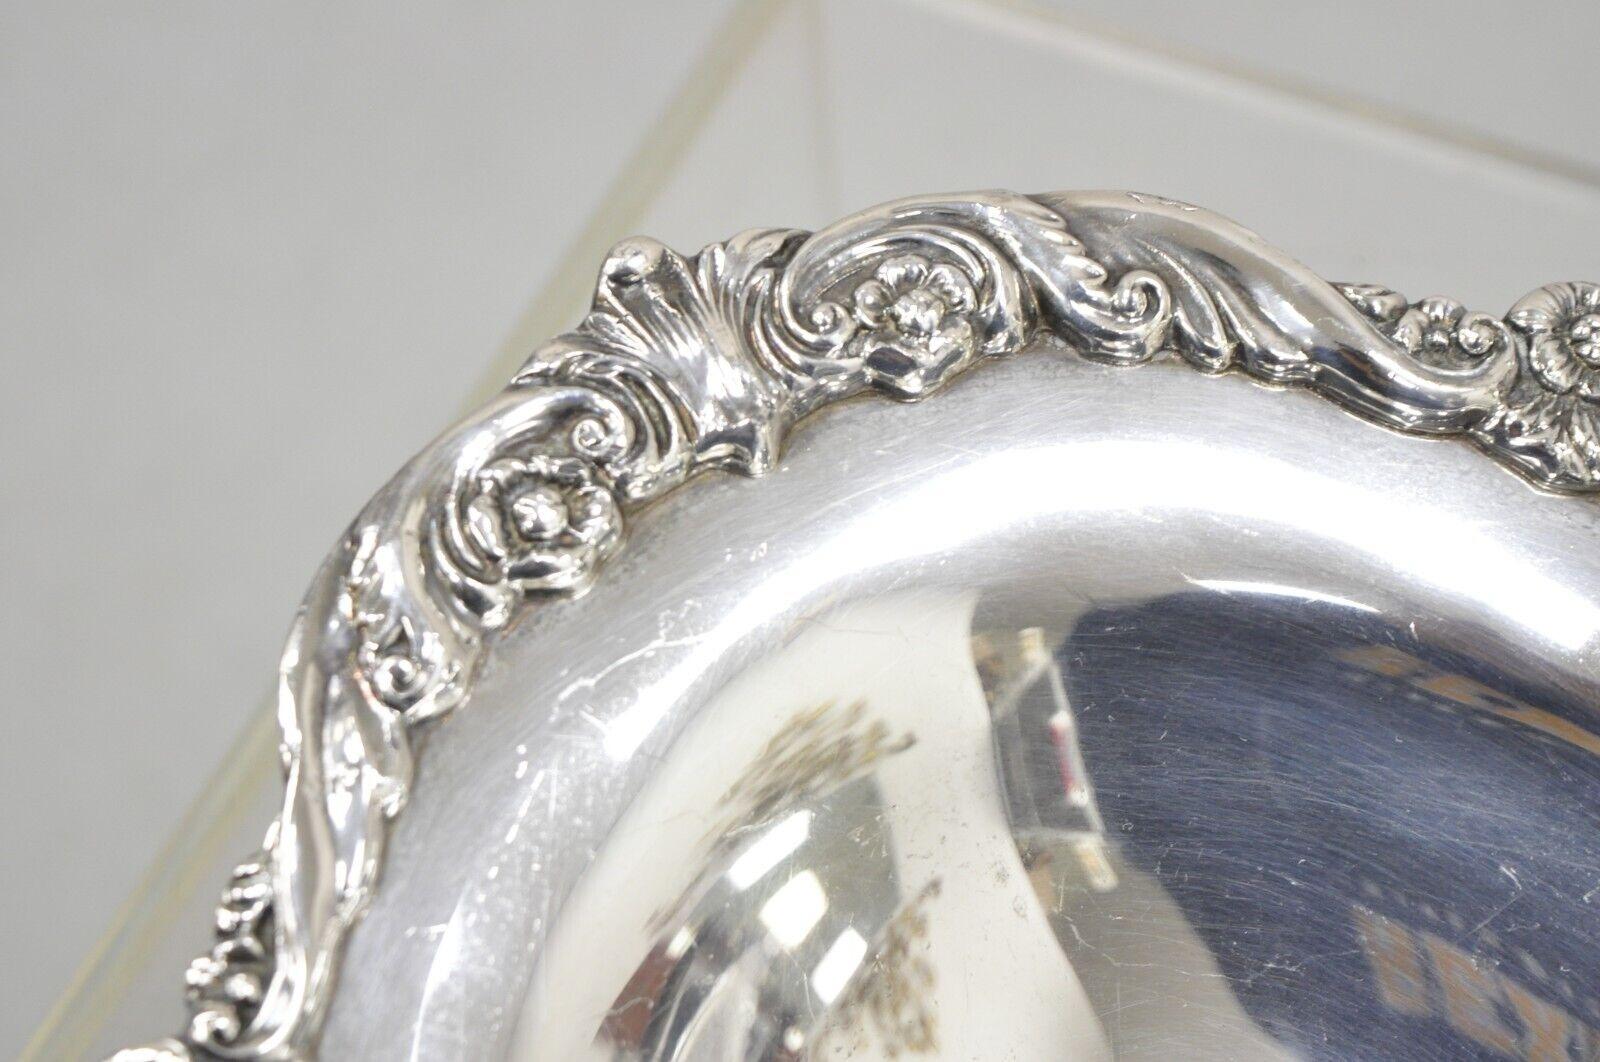 Vintage Sheridan Victorian Style Silver Plated Footed Scalloped Oval Fruit Bowl 1